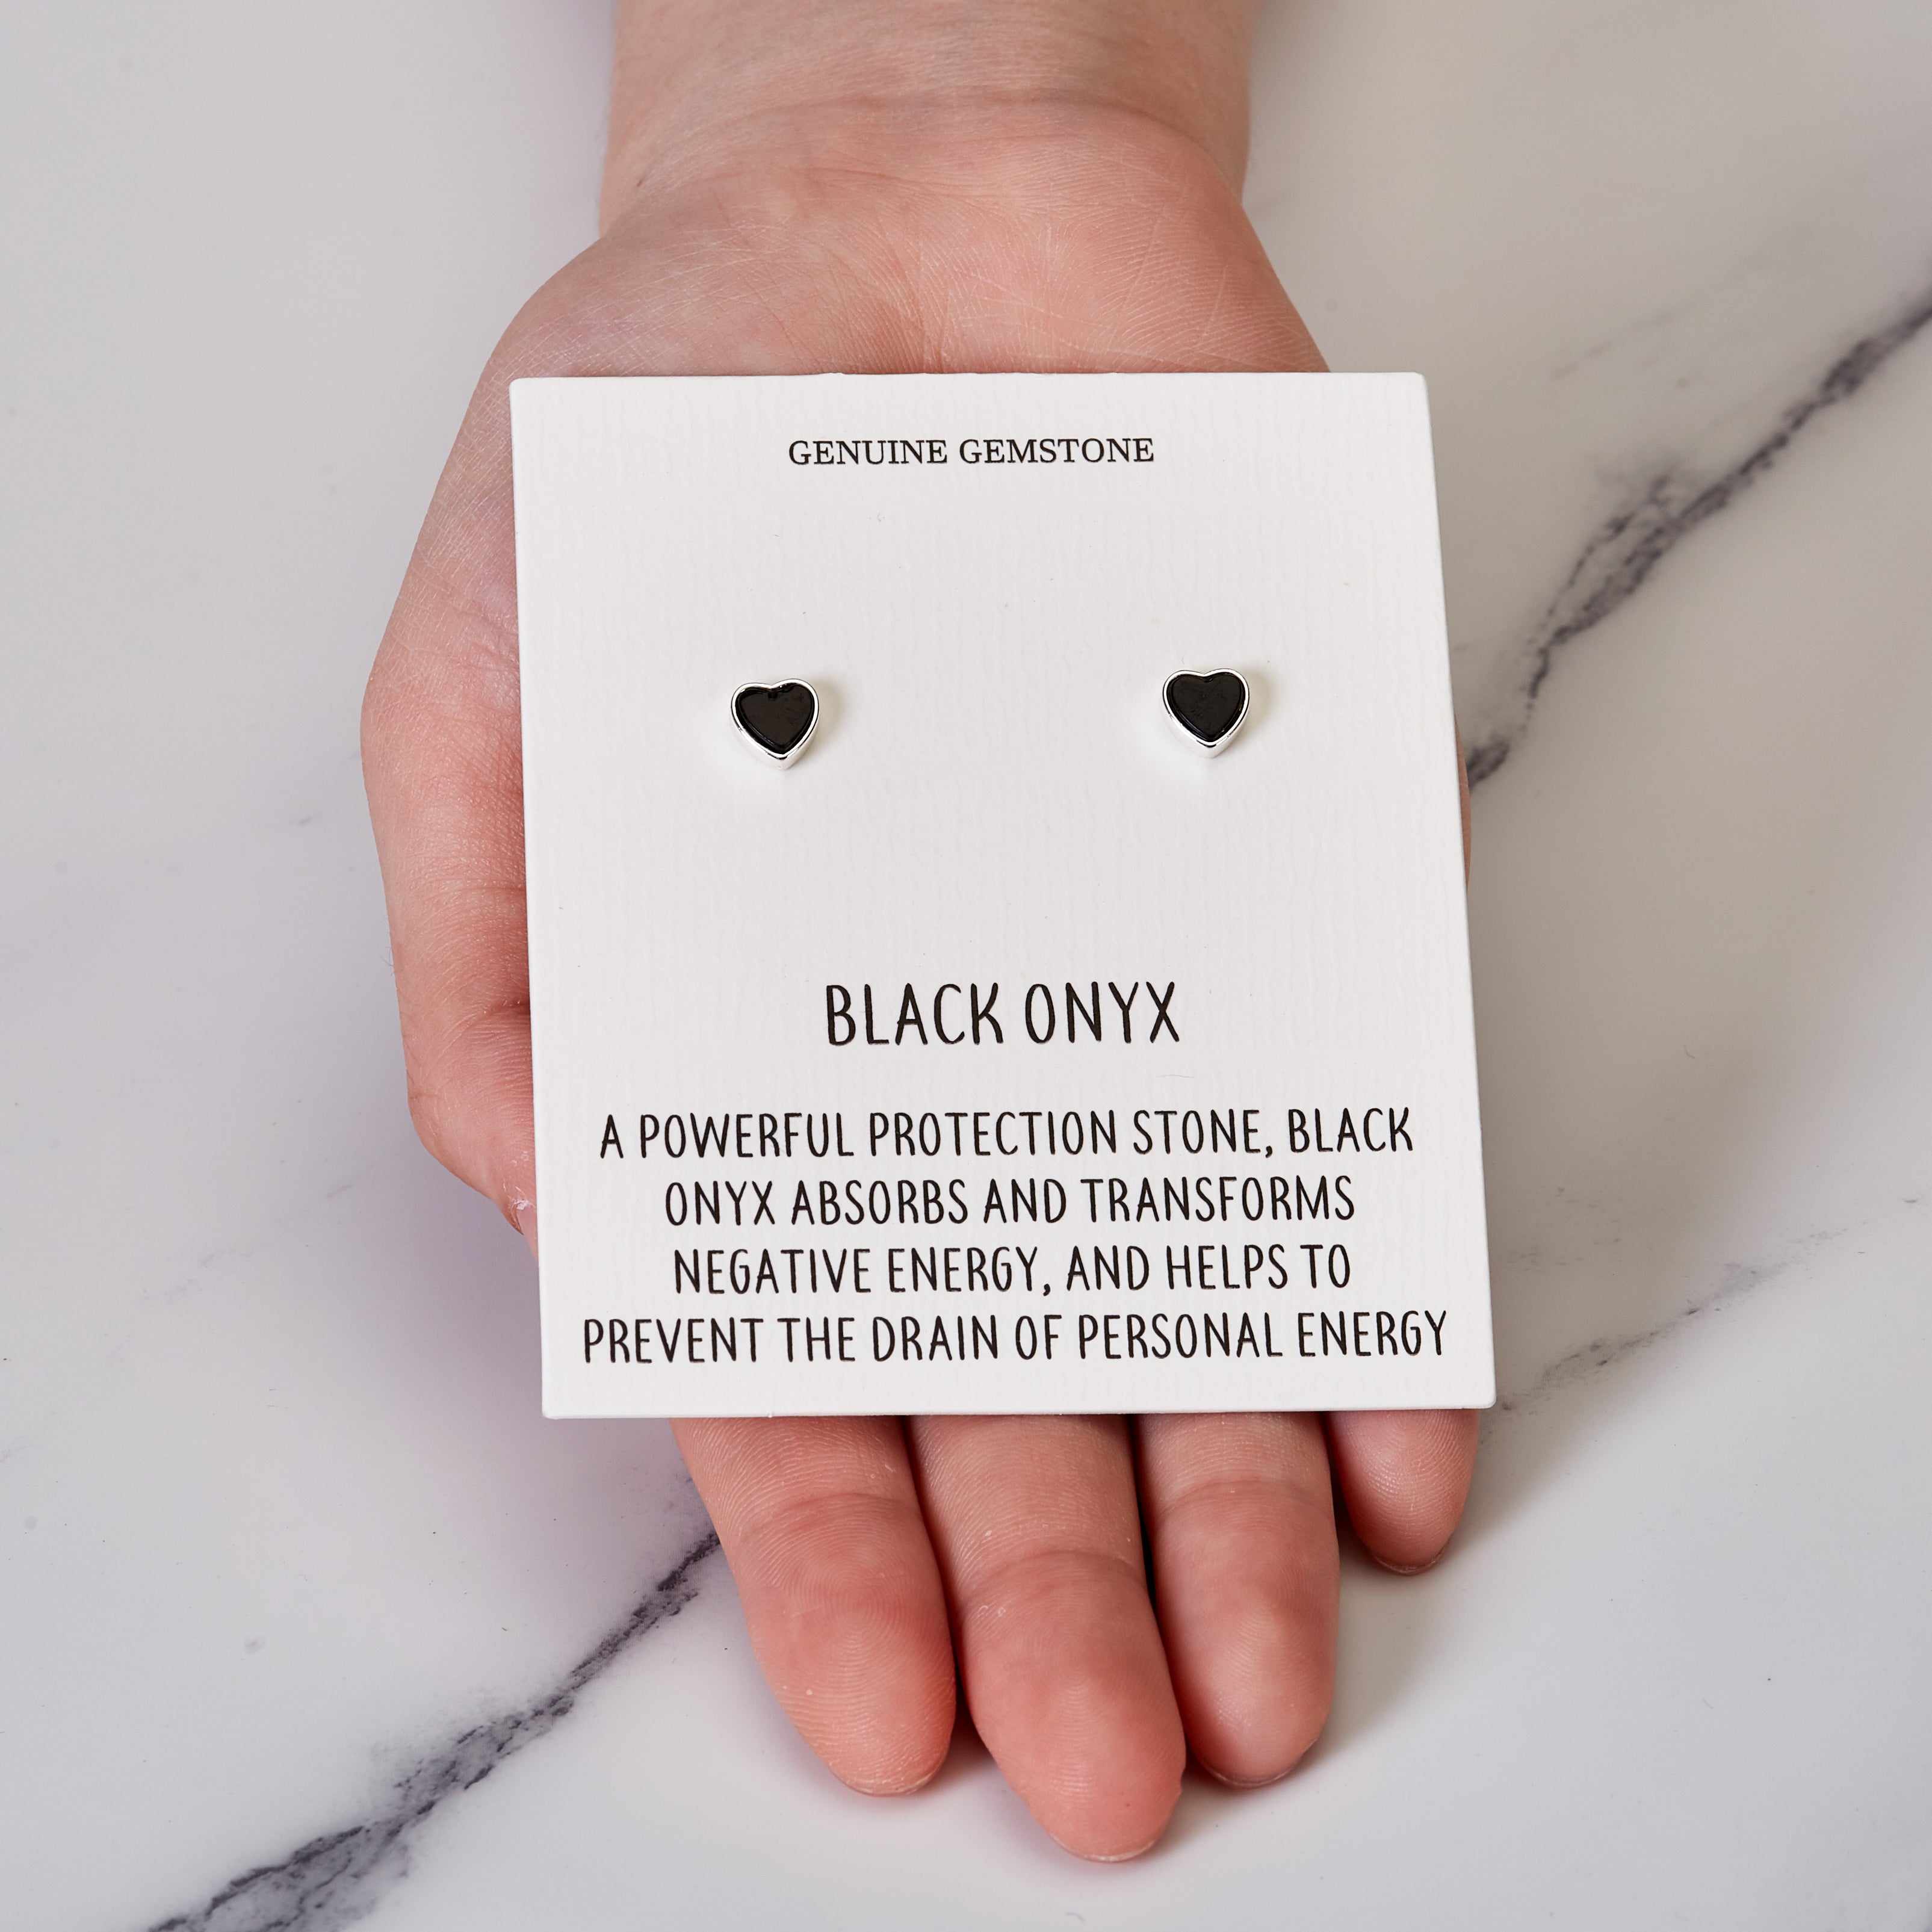 Black Onyx Heart Stud Earrings with Quote Card